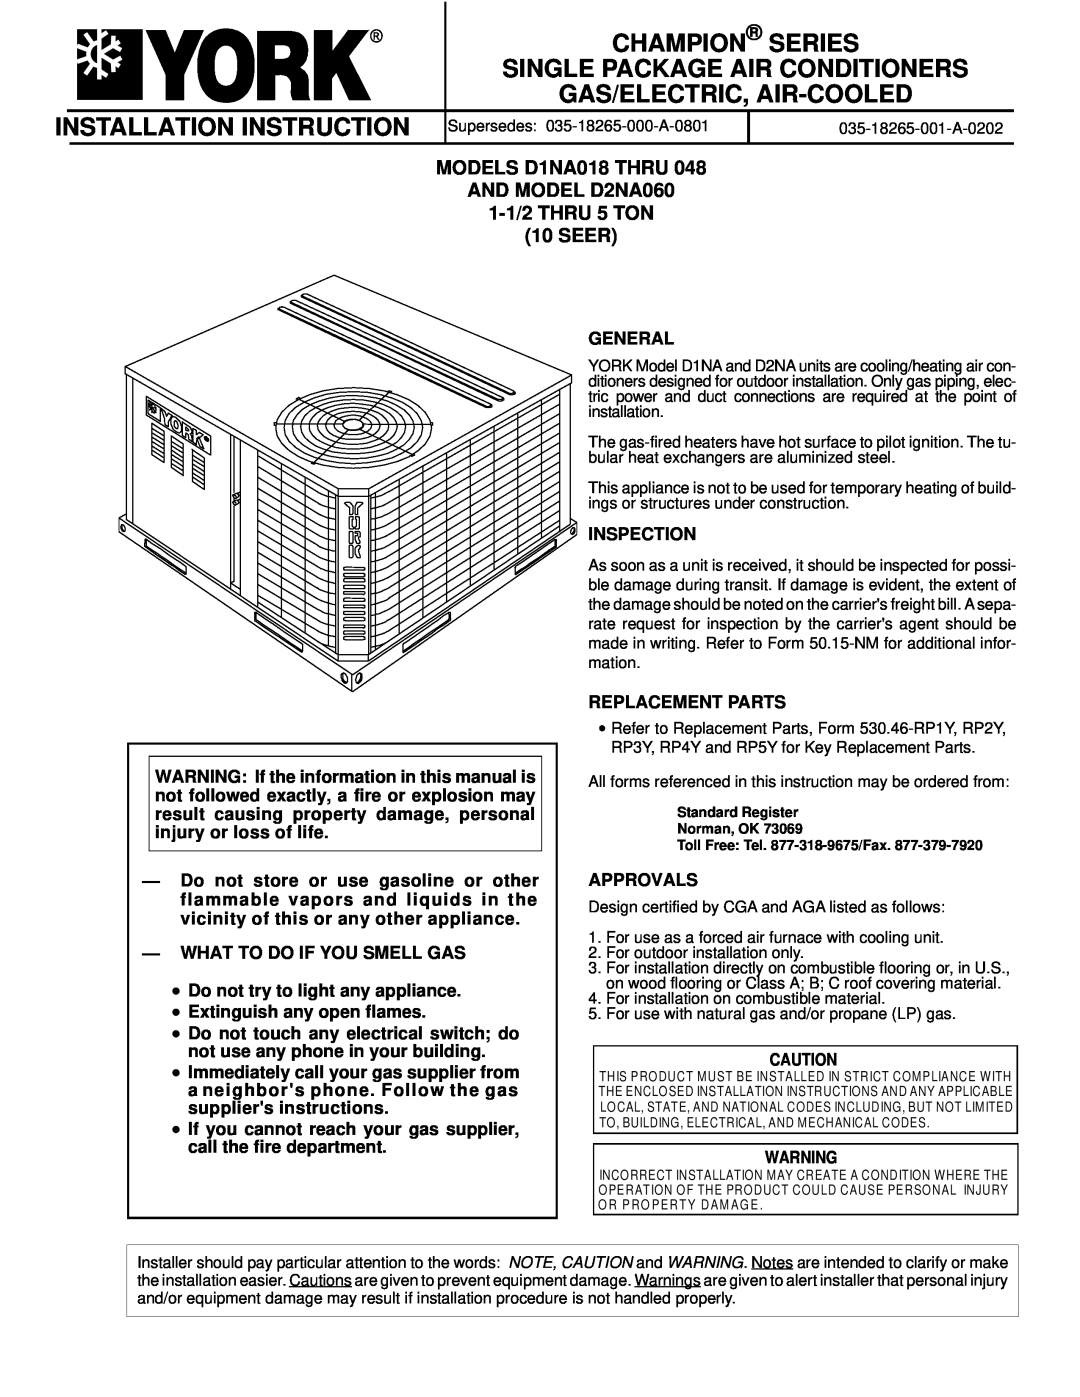 York D1NA018 installation instructions Champion, Series, Installation Instruction, Single Package Air Conditioners 